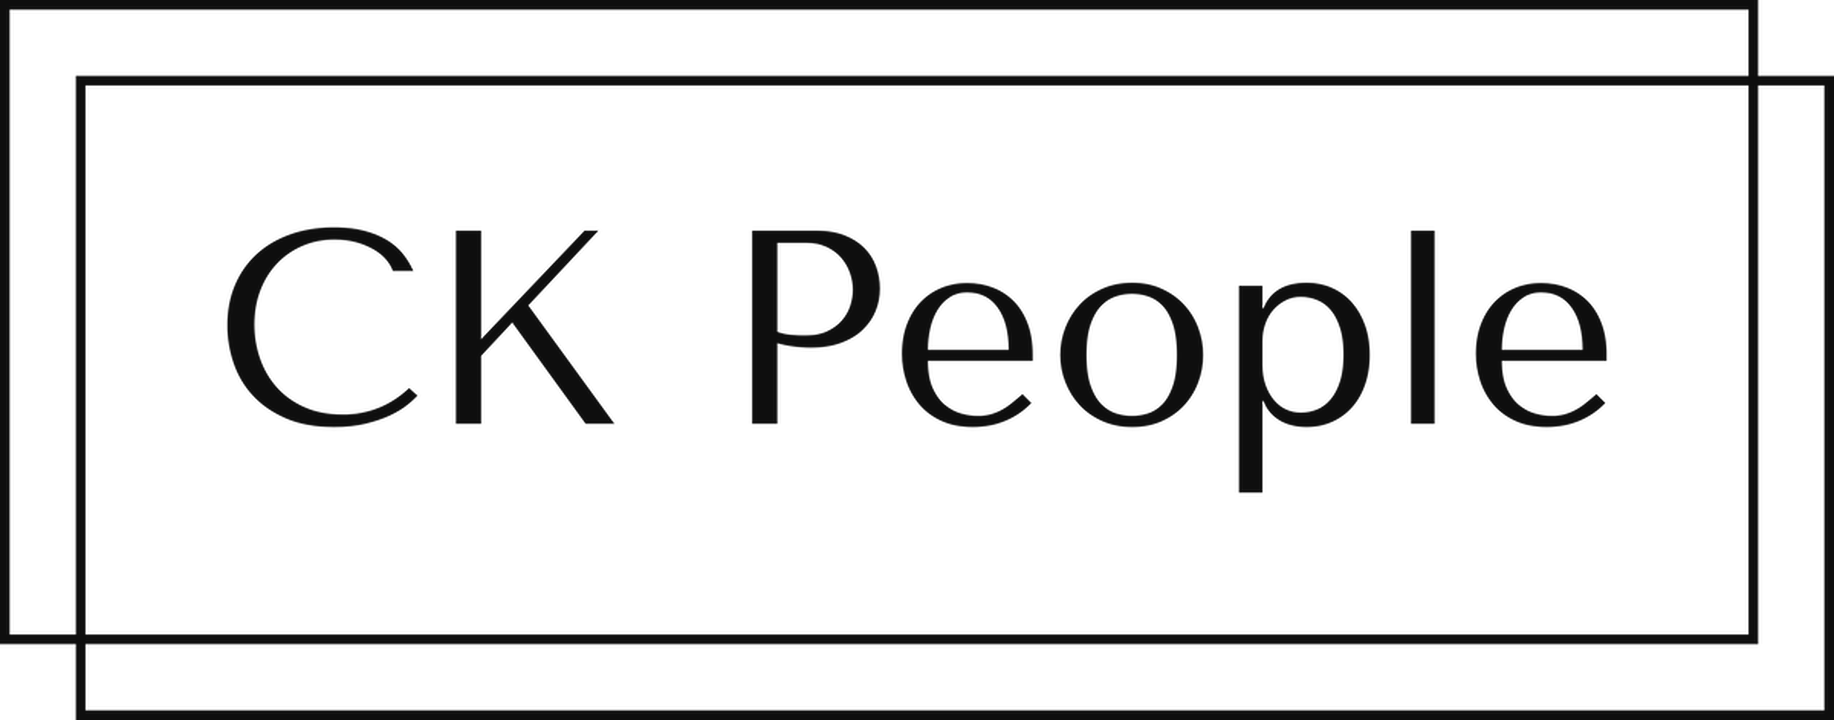 CK People - CK Consult AS